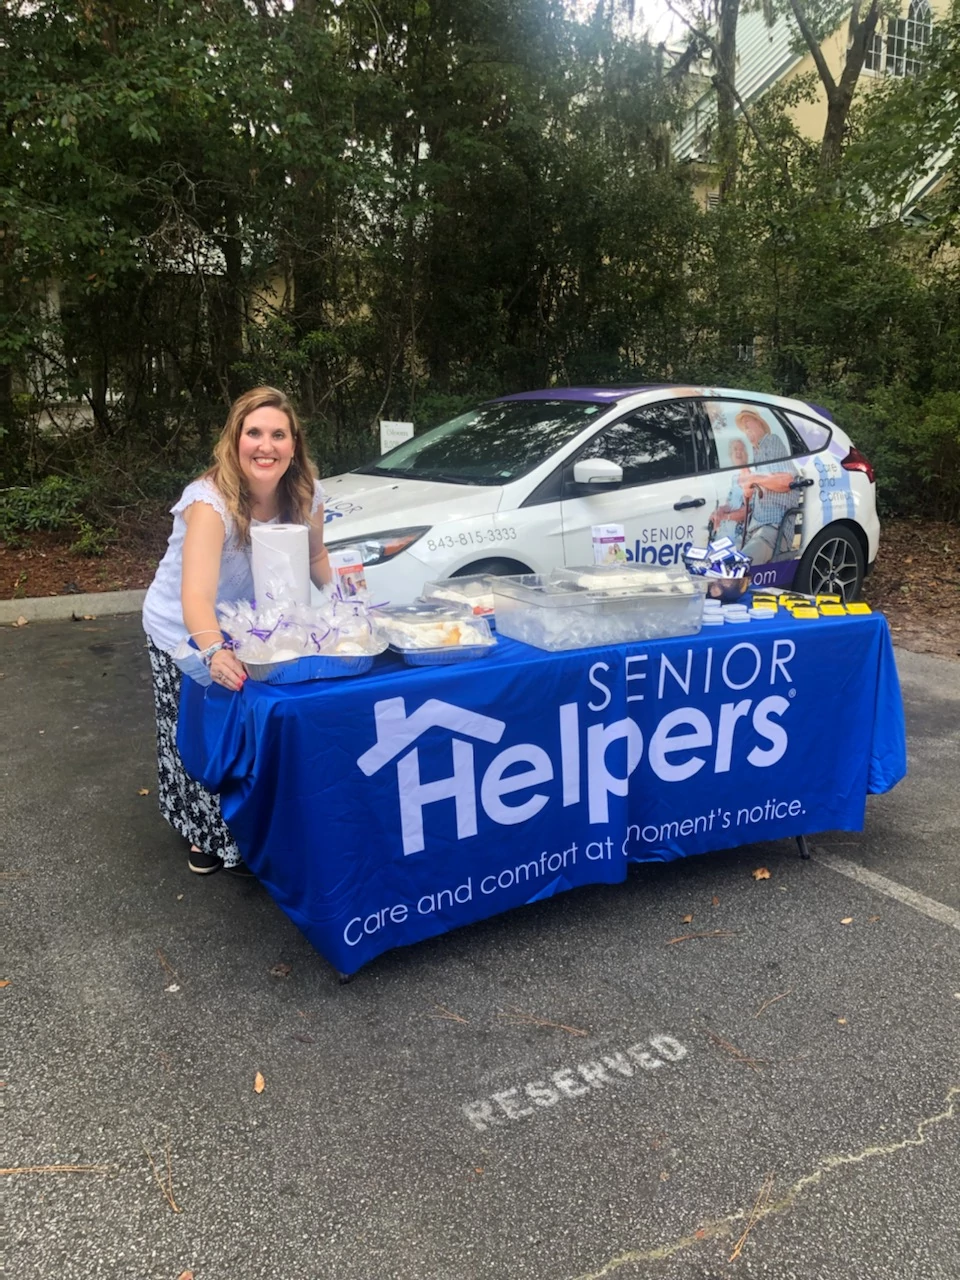 Senior Helpers partnered with The Pines at Bluffton for their recent Summer Bash